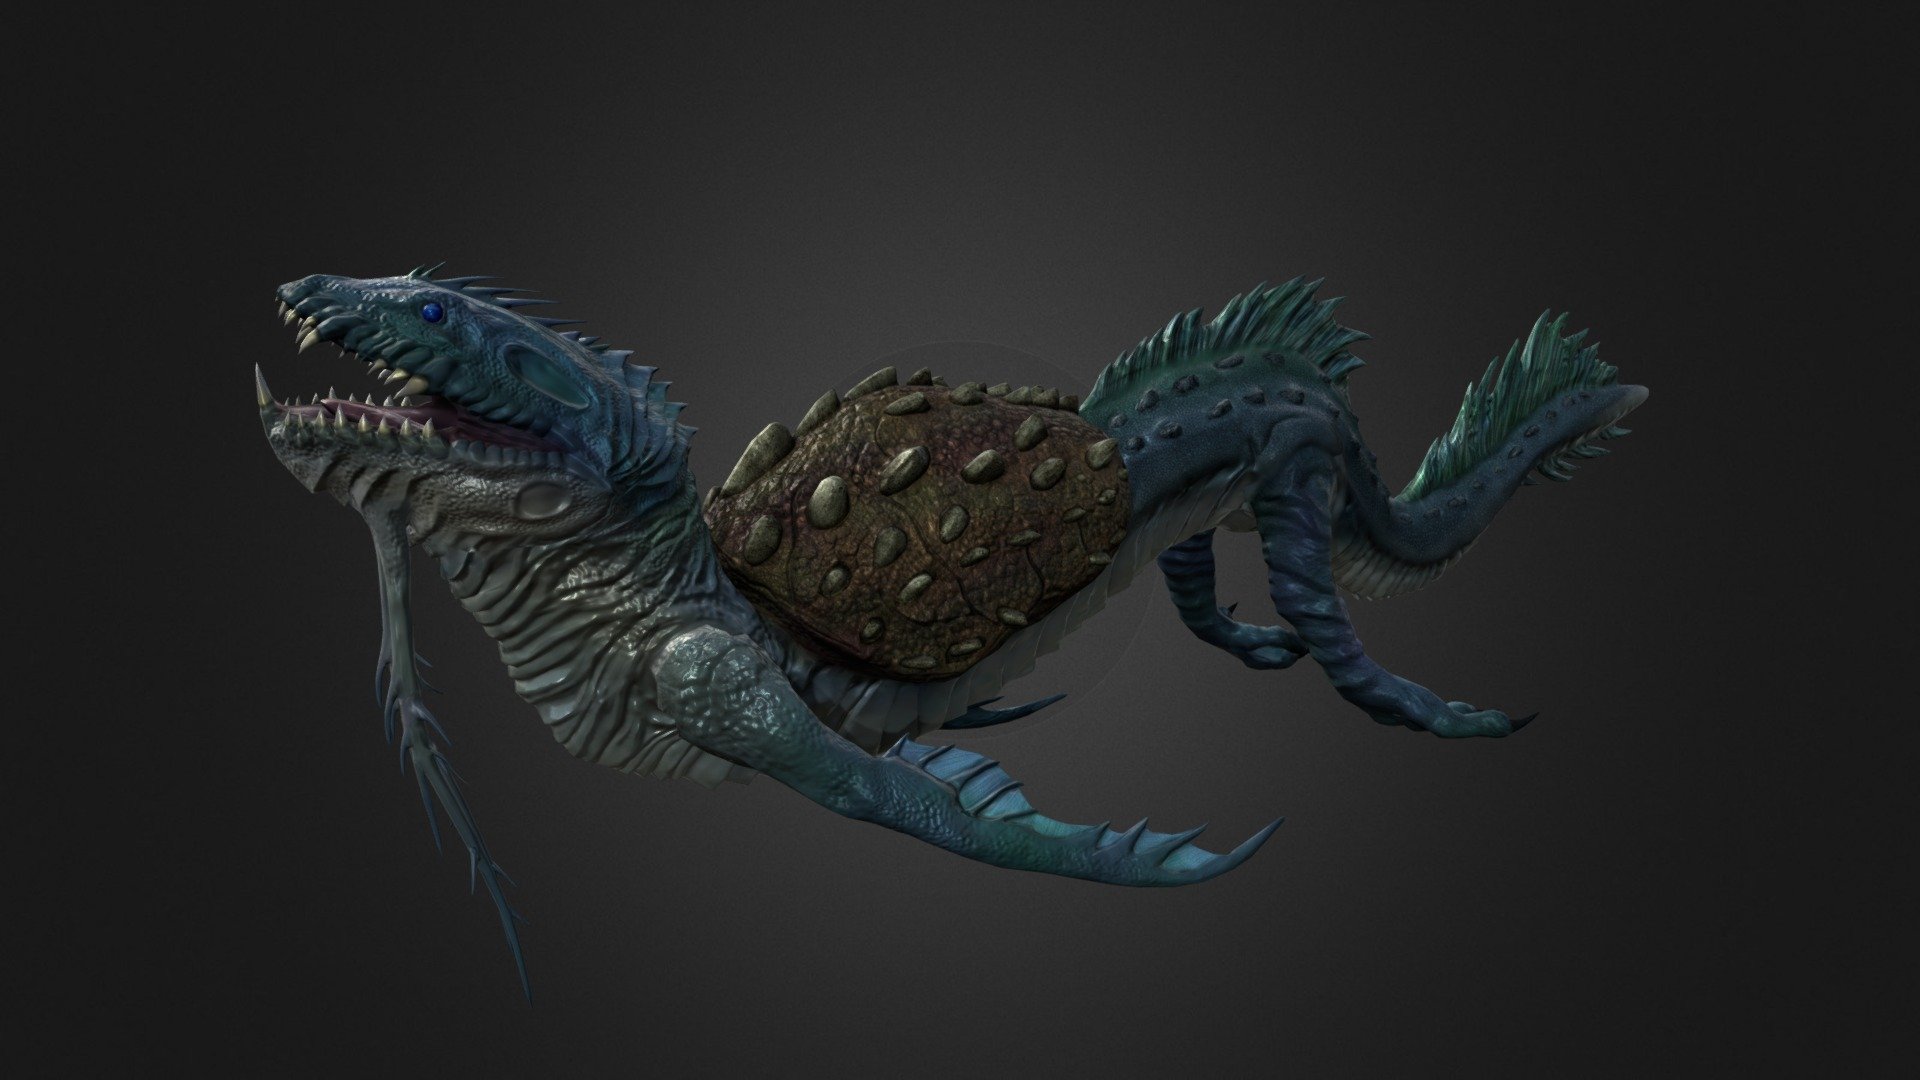 This is Seasil. I had 3 weeks to create him. He is modeled in modo, sculpt in zbrush and textured in photoshop.

Concept art by Elden Ardiente -http://ldn-rdnt.deviantart.com/art/Sea-Monsters-160481743

Also my website http://lawlordp.wix.com/milantiquestudios - Seasil The Sea Monster - 3D model by Milantique (@lawlordp) 3d model